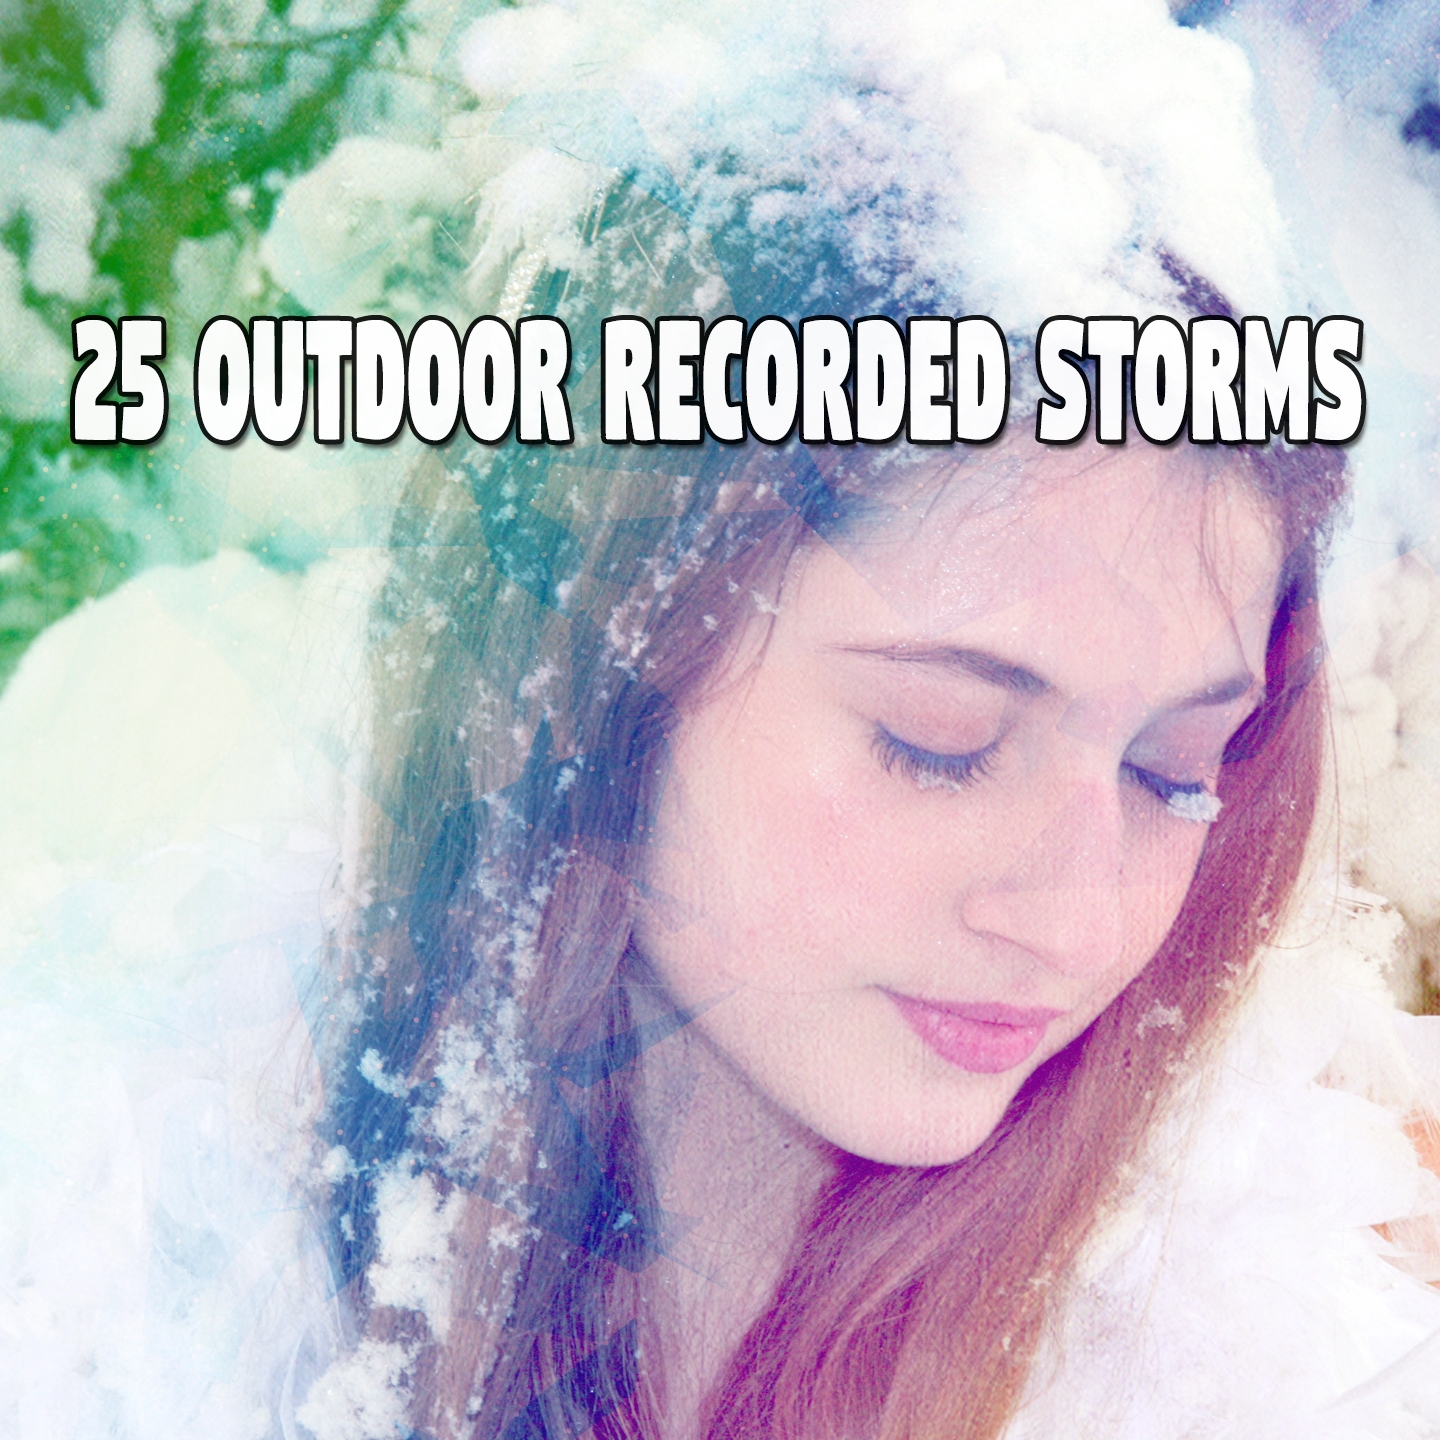 25 Outdoor Recorded Storms